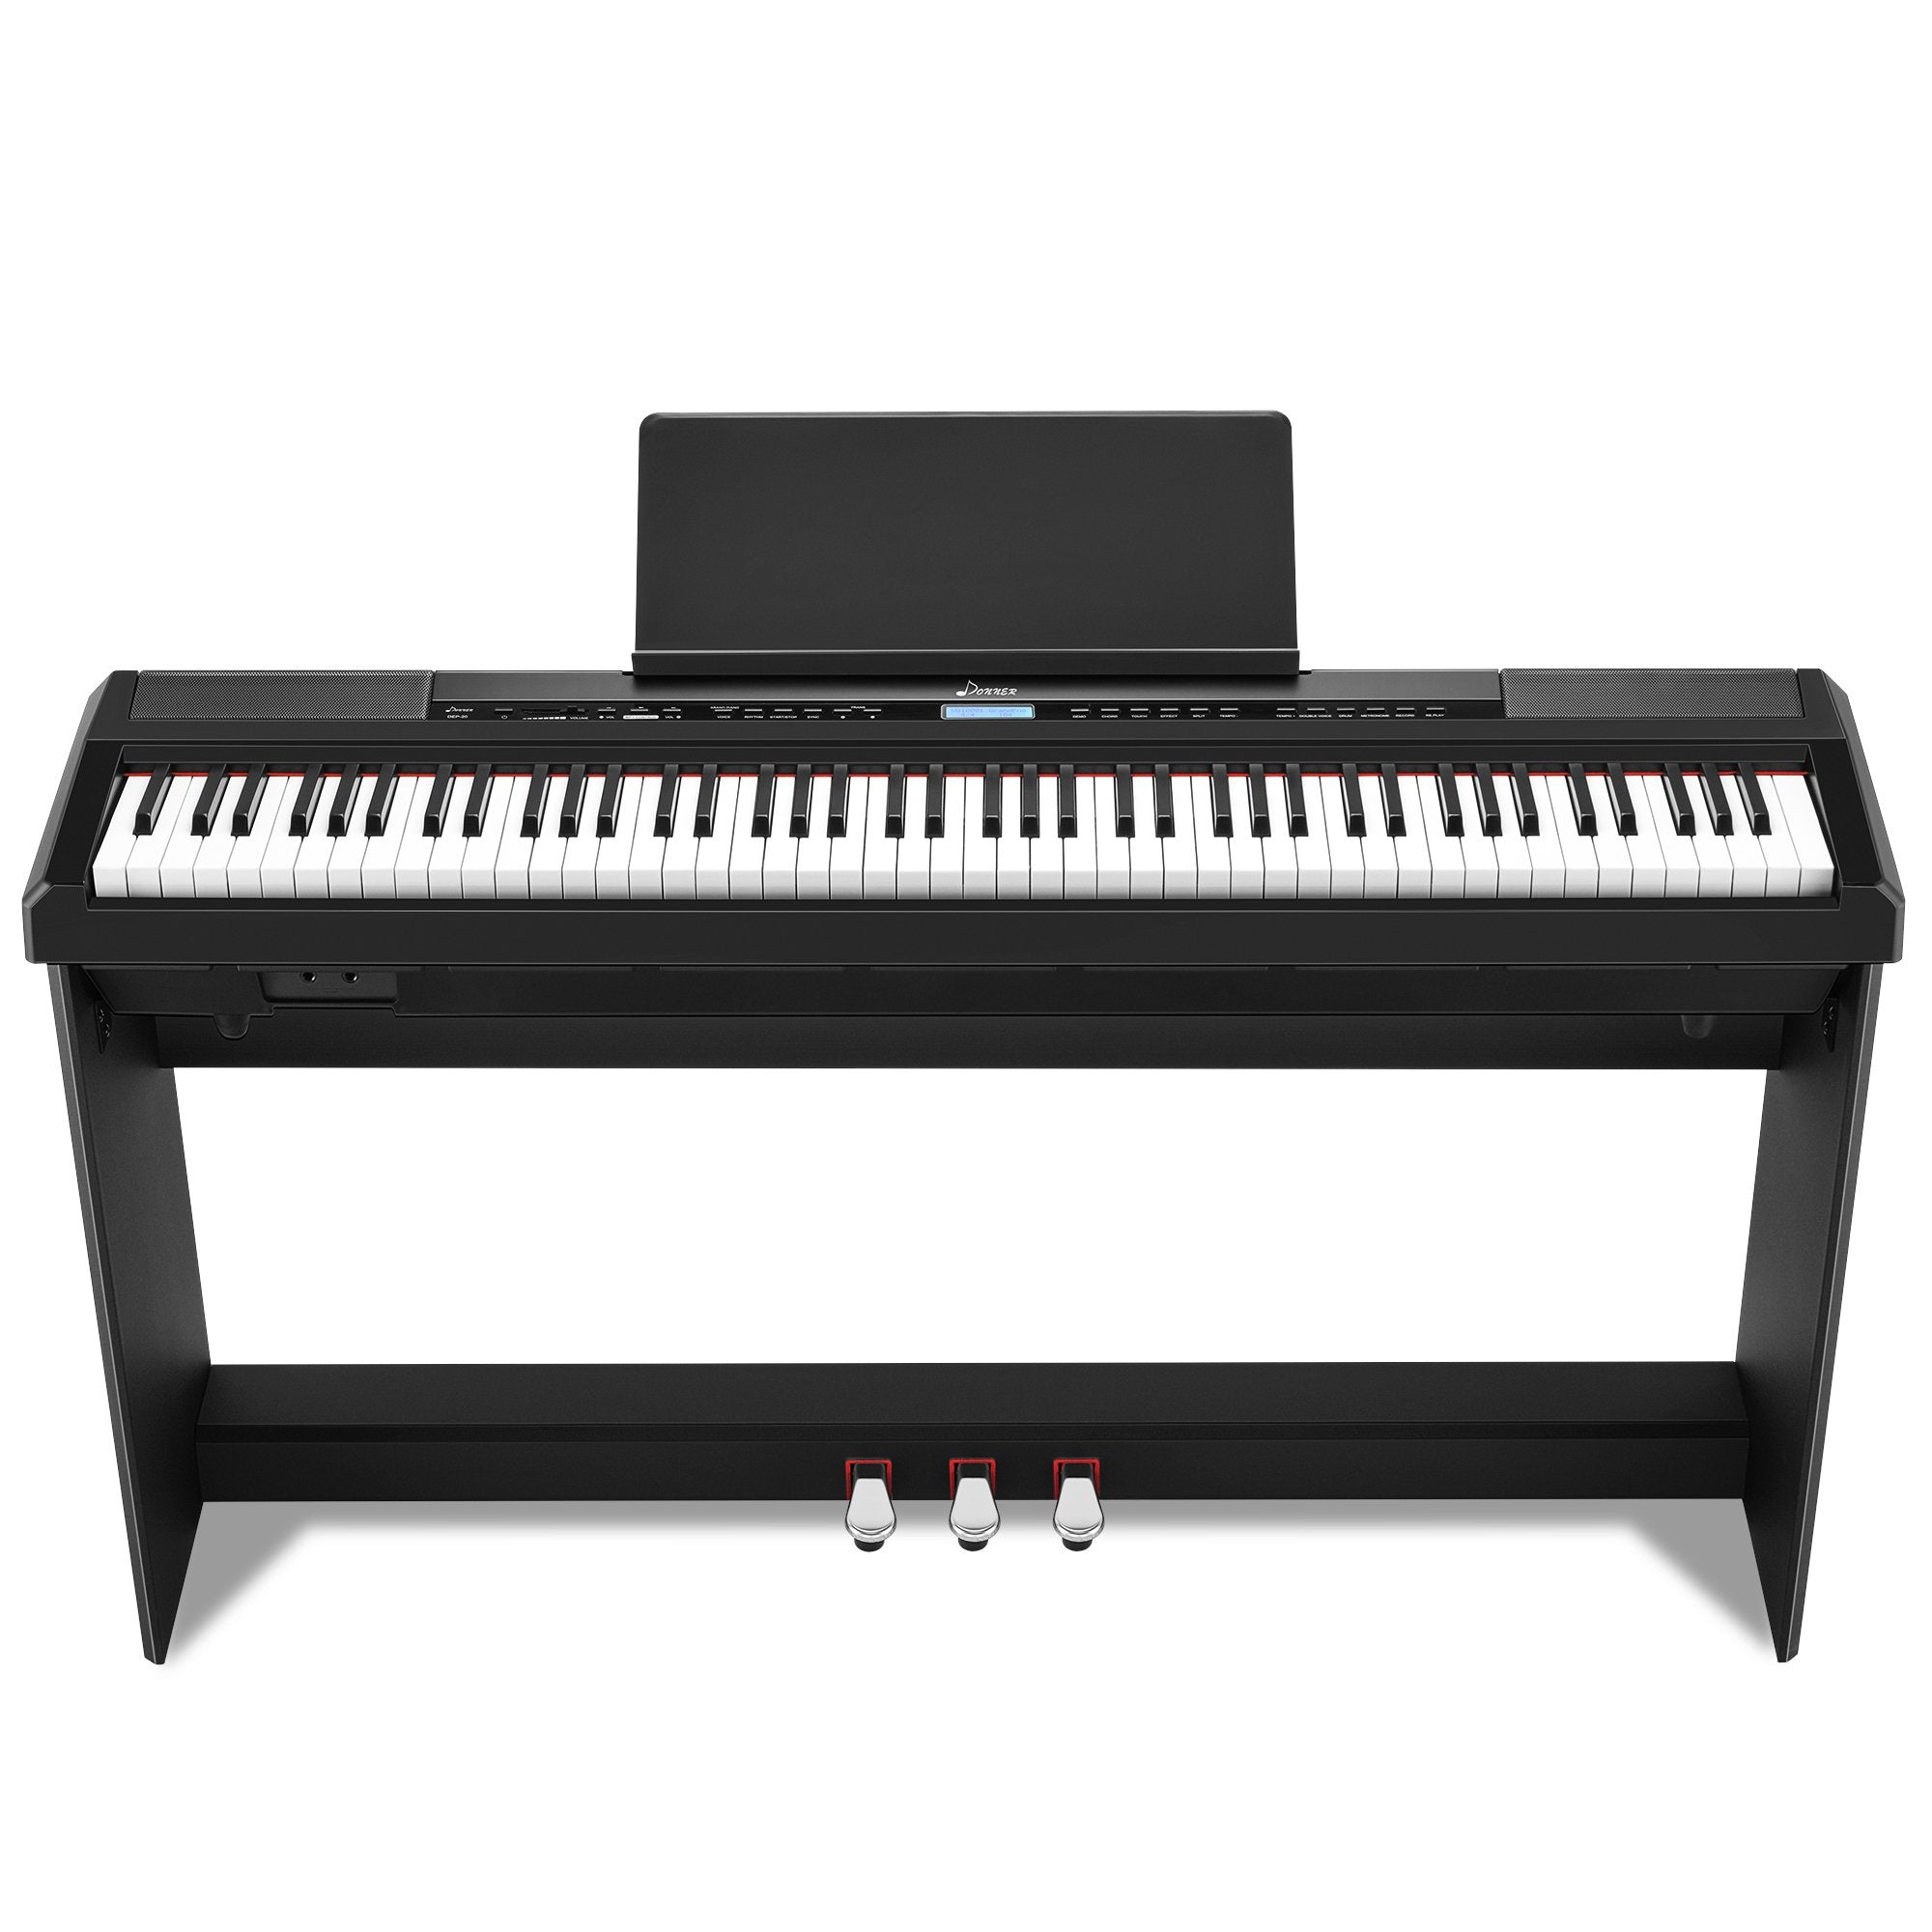 

Donner DEP-20 Beginner Digital Piano 88 Key Full Size Weighted Keyboard, Portable Electric Piano with Furniture Stand, 3-Pedal Unit